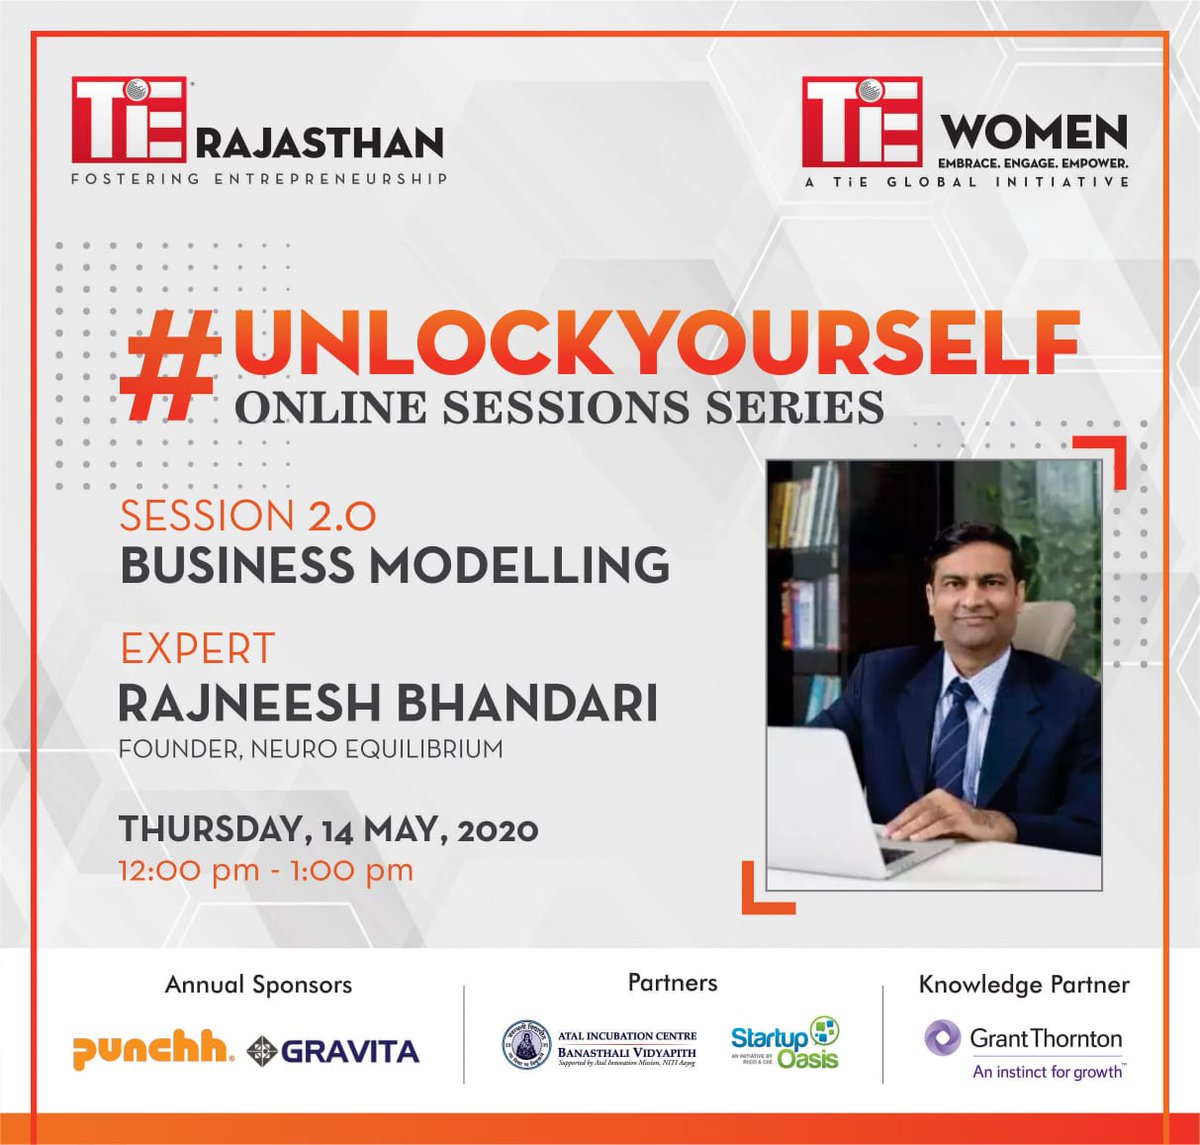 Join our next #UNLOCKYOURSELF Session for TiE Women this week. Business Modelling with Rajneesh Bhandari,a Serial Entrepreneur, Founder at Cosmo Infra Solutions and NeuroEquilibrium & Past President of TiE Rajasthan. To know more and register please visit lnkd.in/fQfrzss